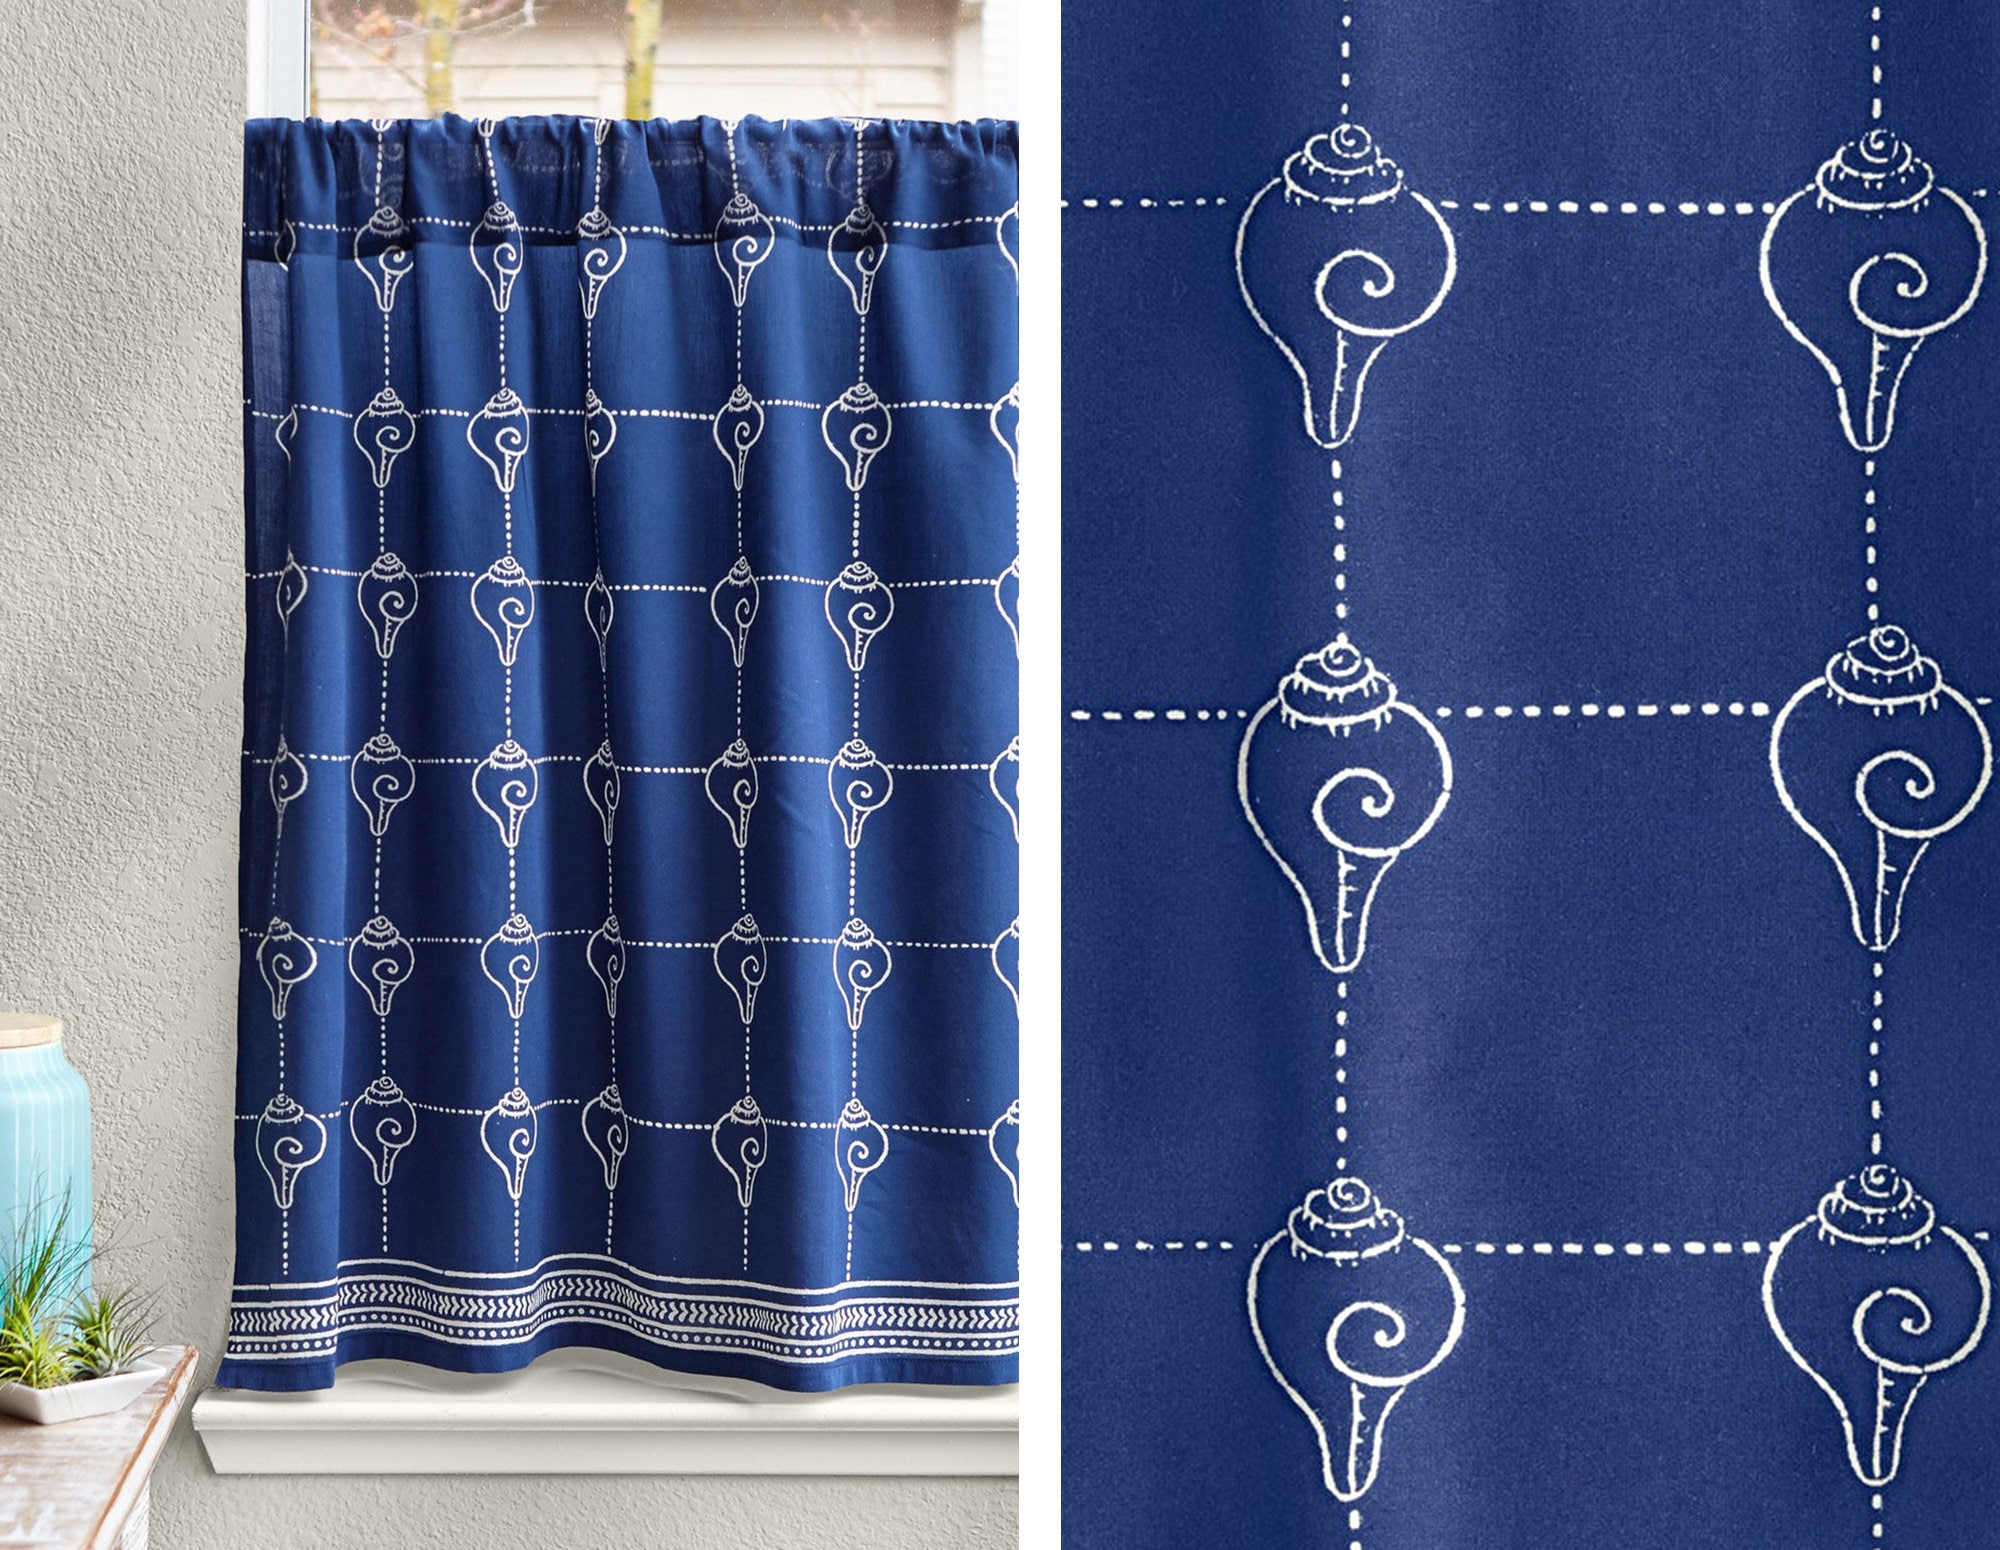 LSW Blue Flower Petals Deluxe Fabric Shower Curtain with Rings 